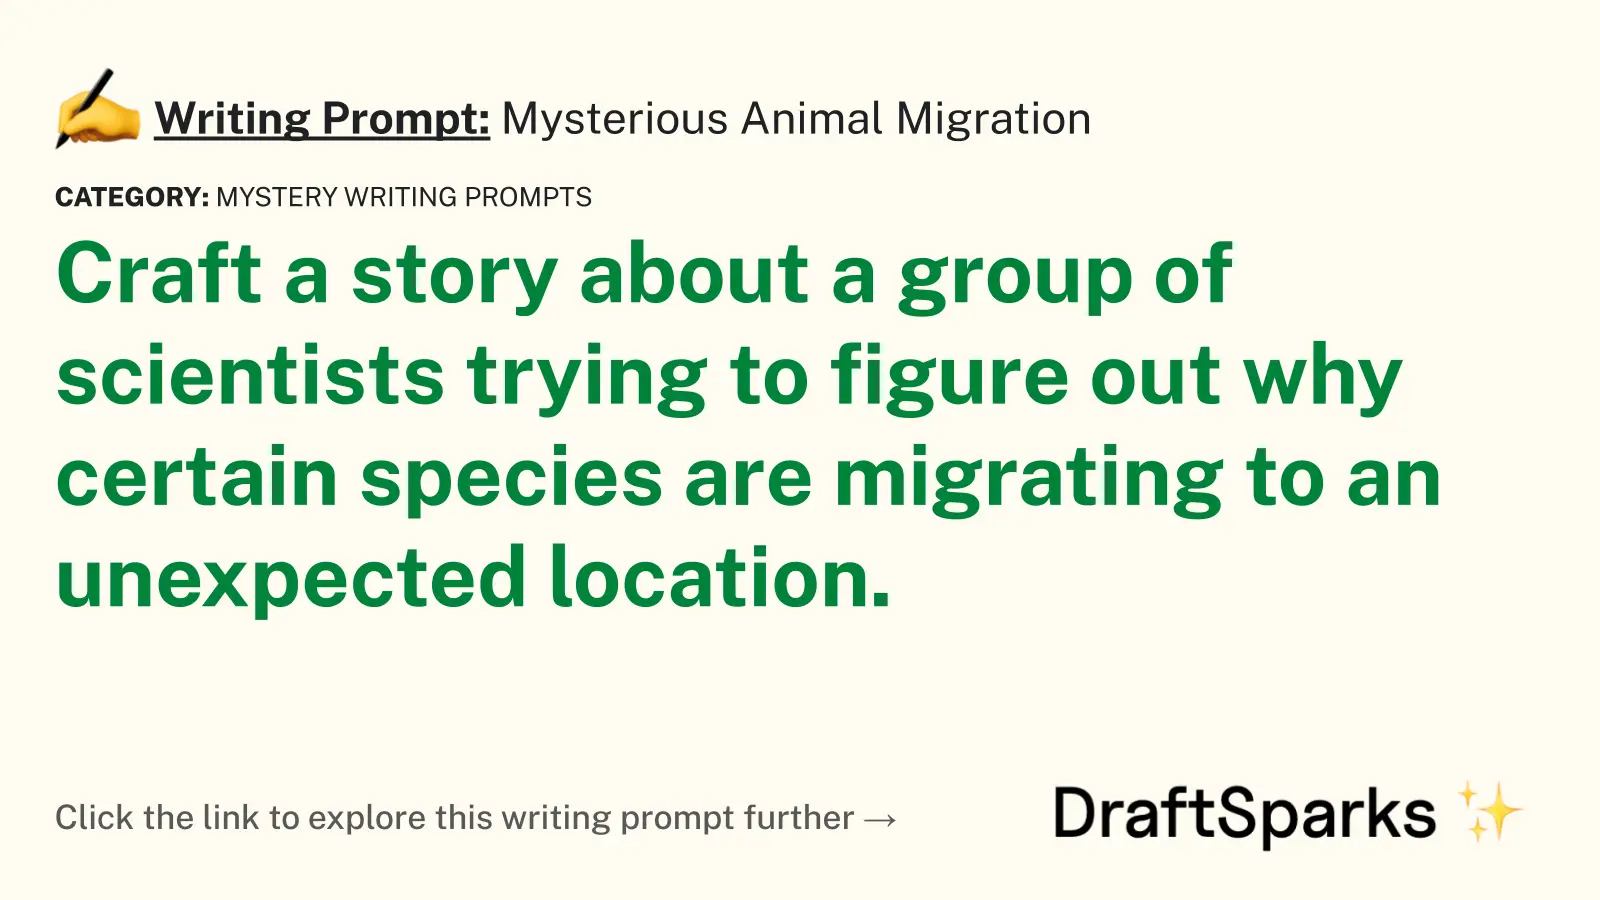 Mysterious Animal Migration